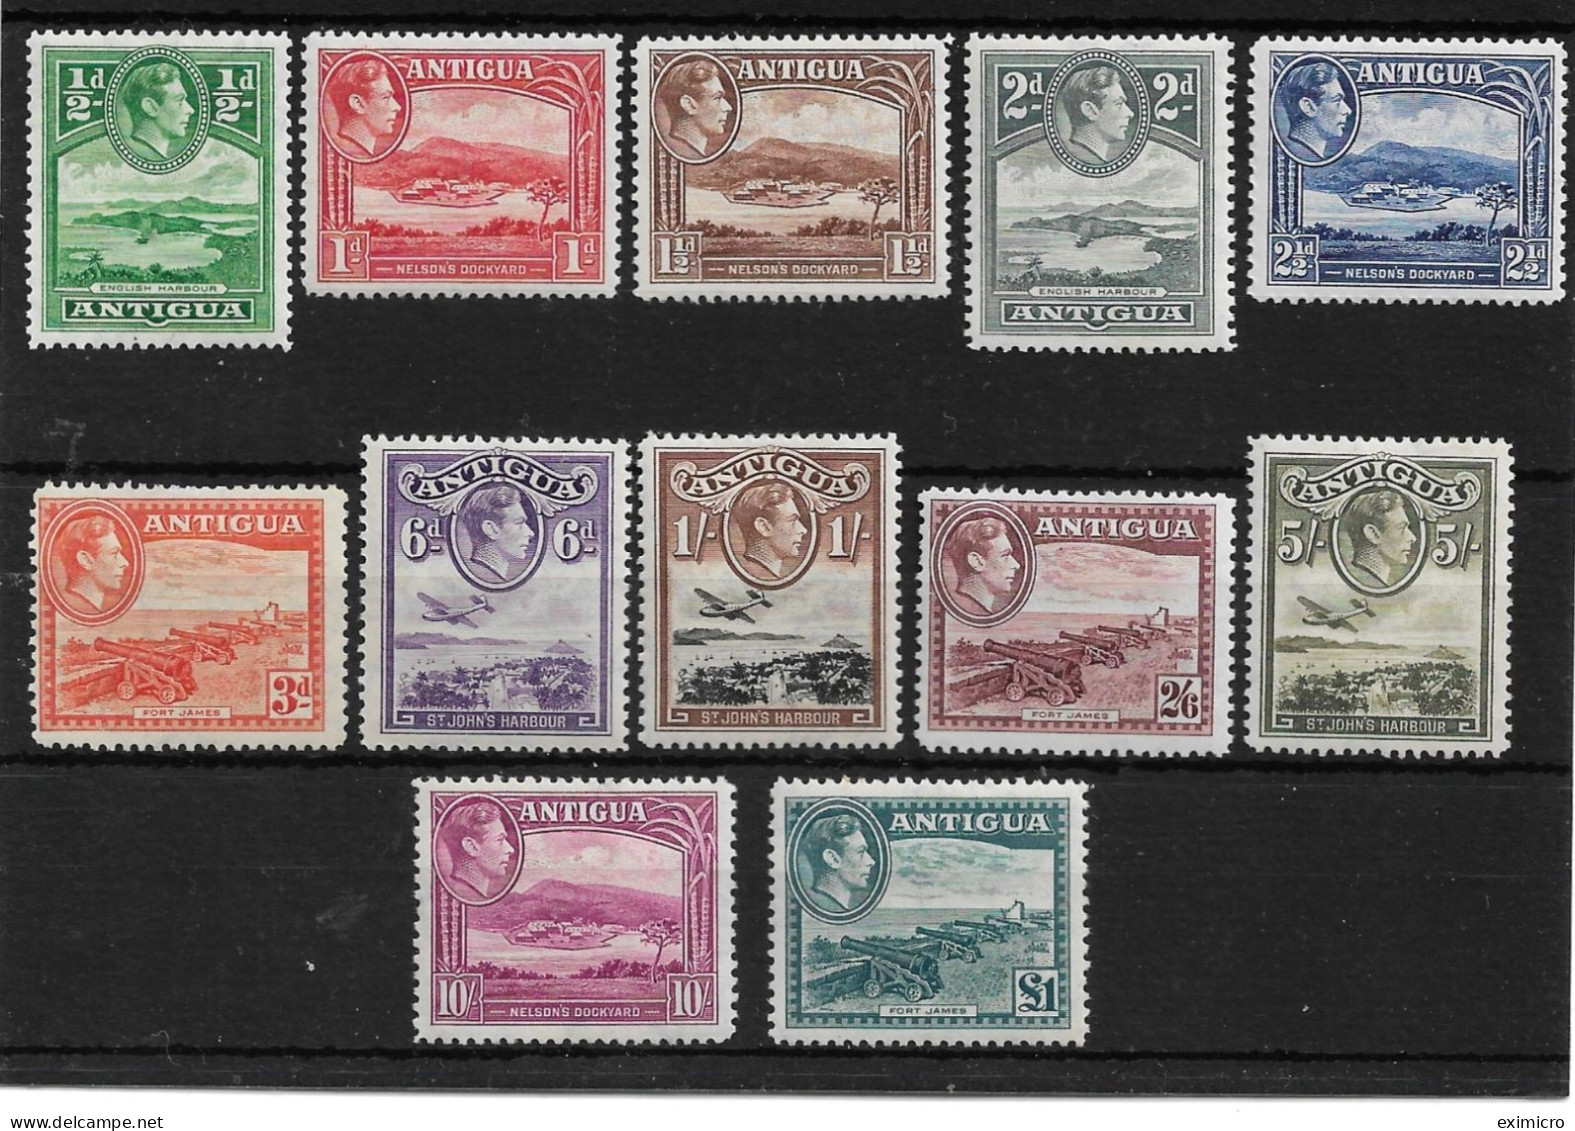 ANTIGUA 1938 - 1951 SET SG 98/109 MOUNTED MINT Cat £130 - 1858-1960 Crown Colony